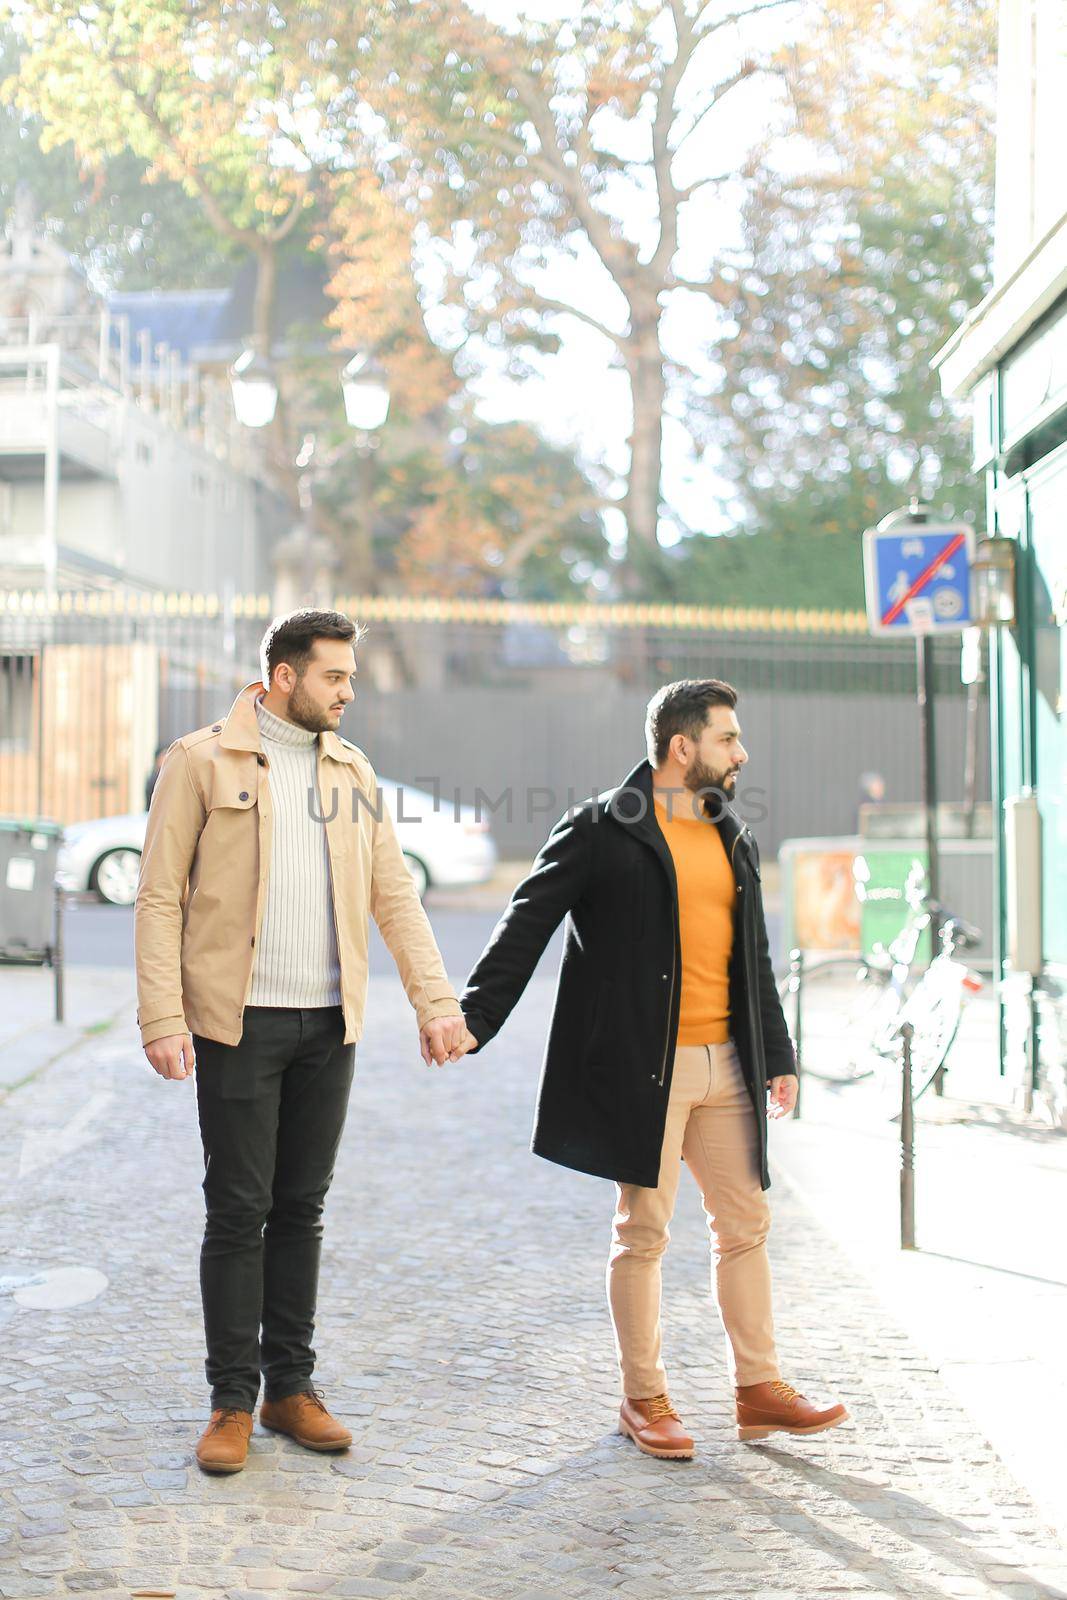 Gays standing and holding hands in city. Concept of same sex couple and lgbt.